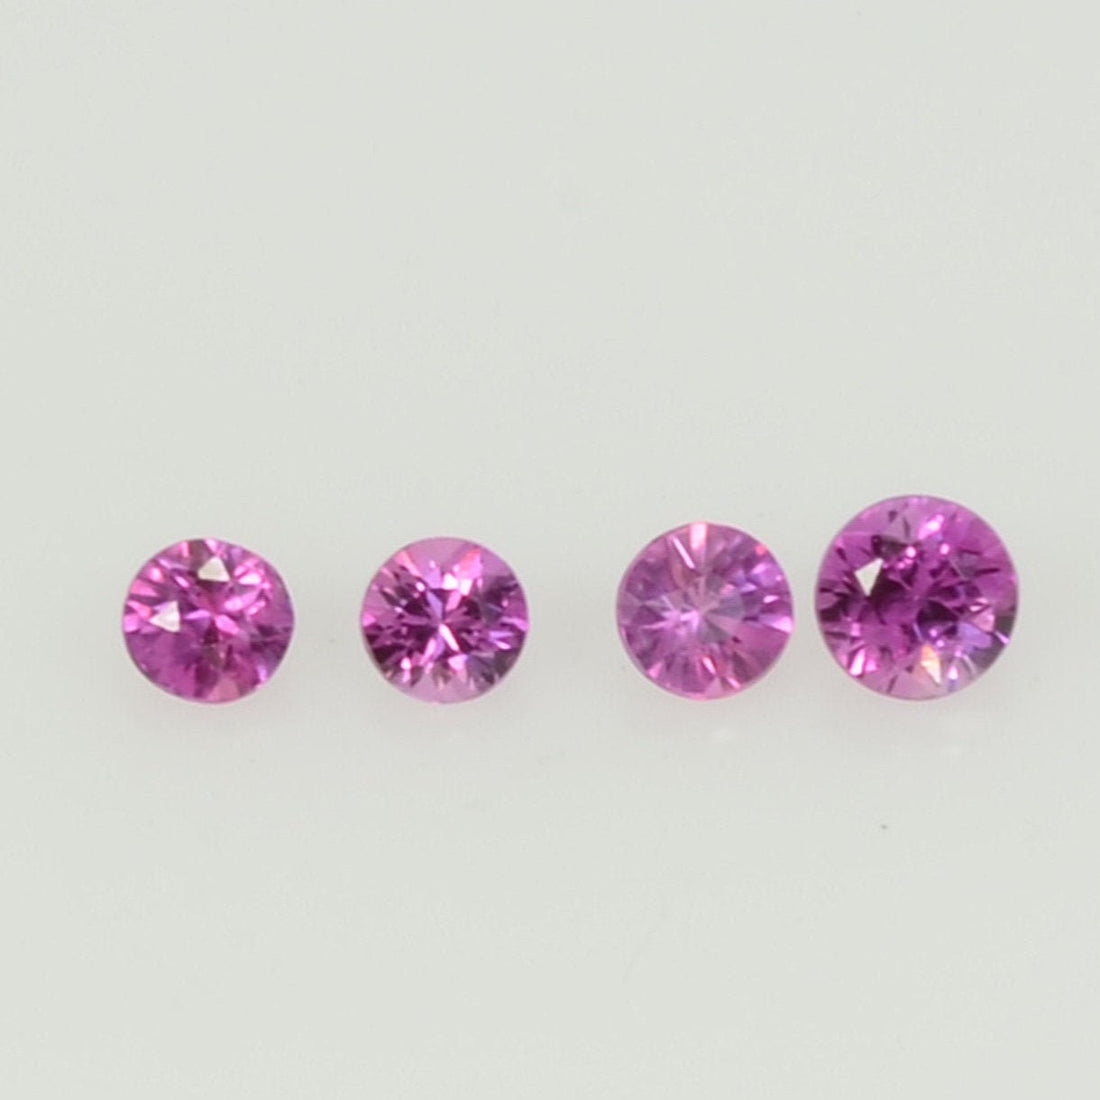 1.8-2.3 mm Natural Pink Sapphire Loose Gemstone Round Diamond Cut Cleanish Quality A Color